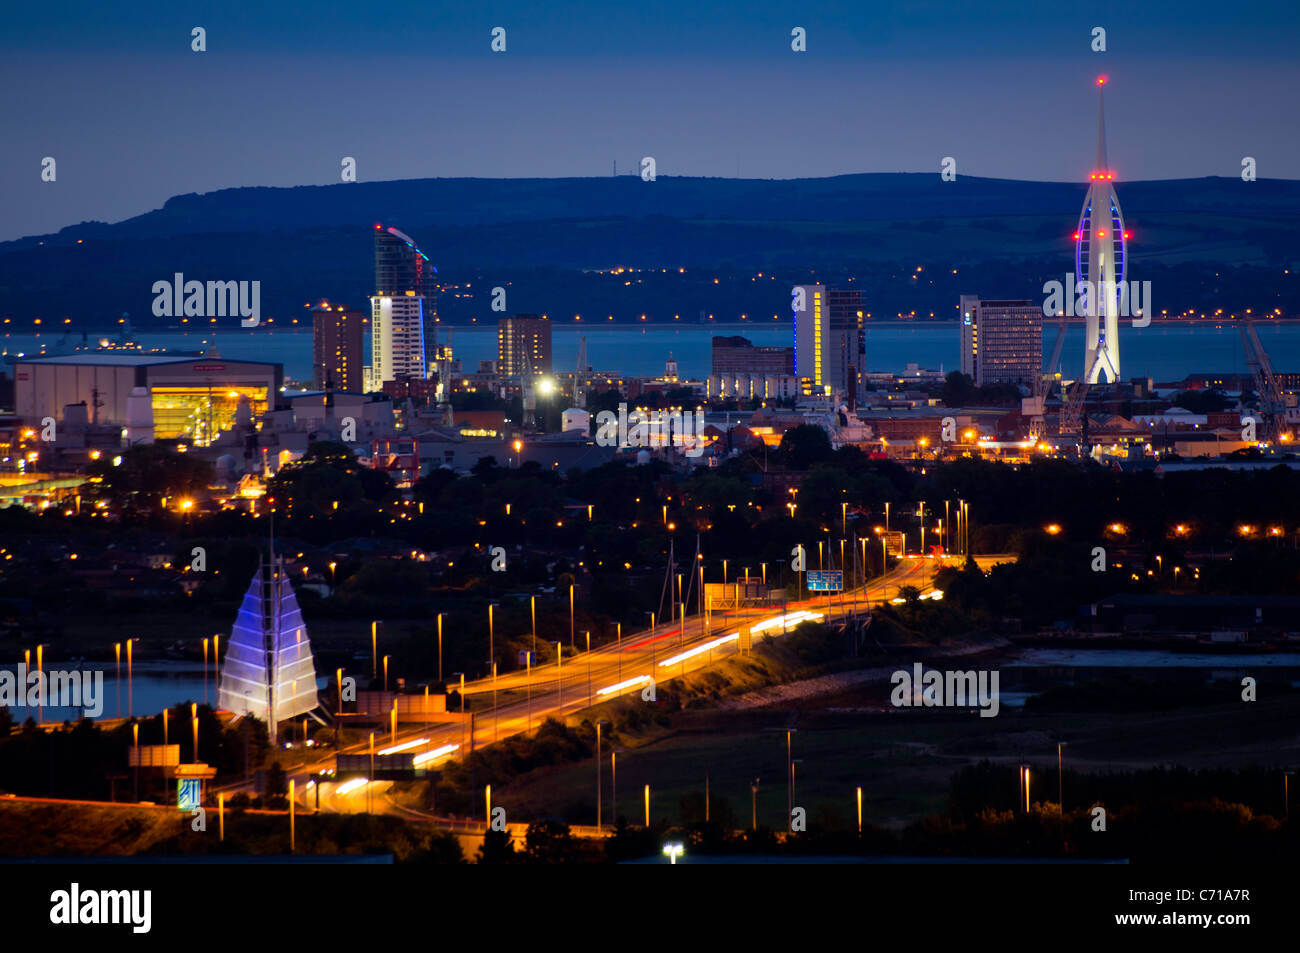 A panoramic view of Portsmouth city at night showing the Spinnaker Tower and the Isle of Wight in the distance. Stock Photo